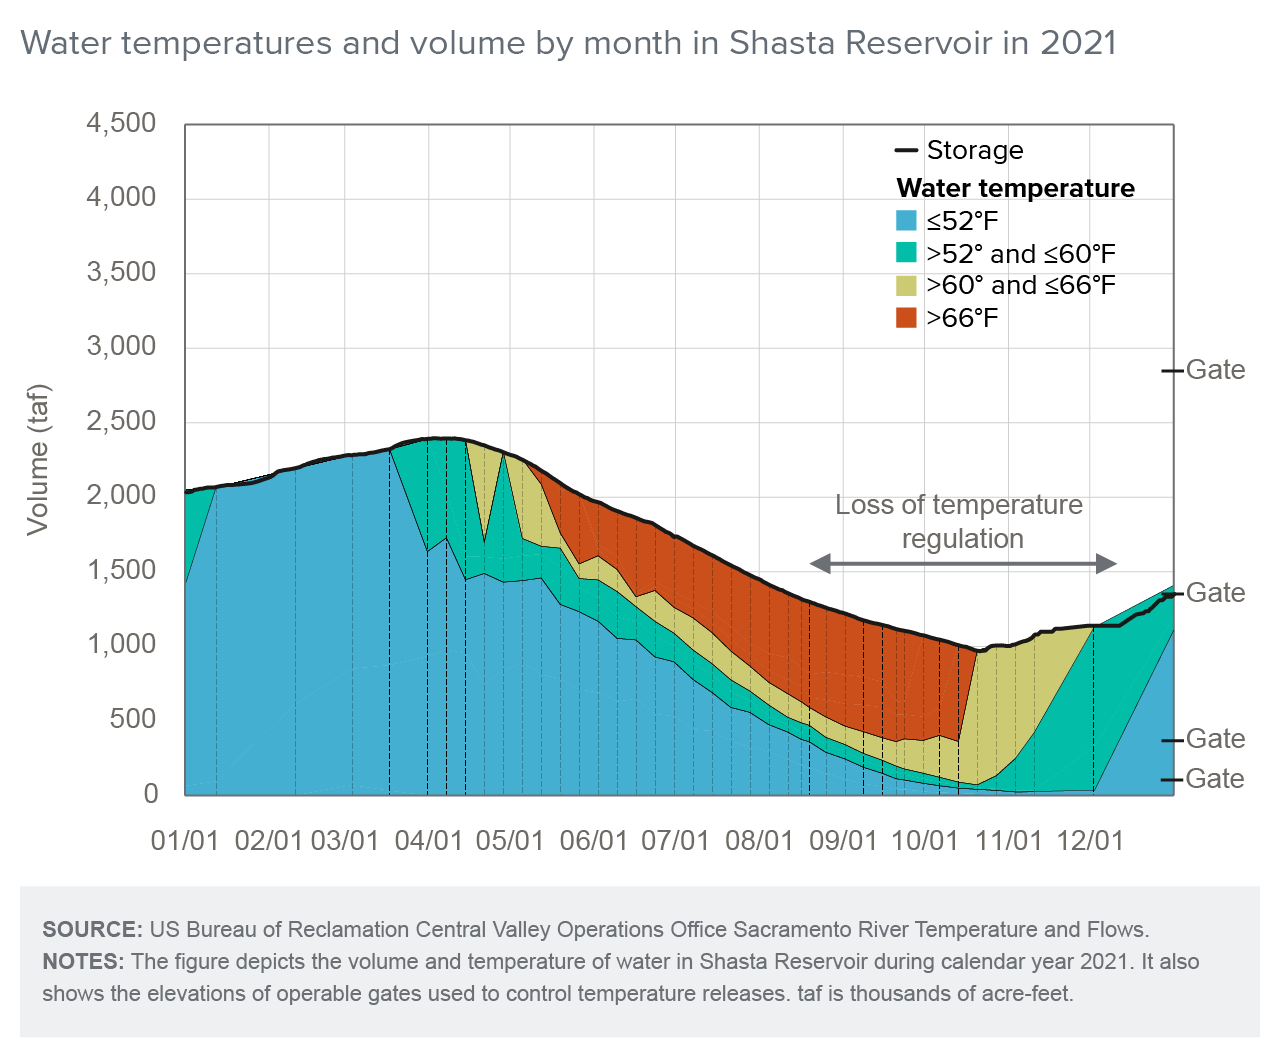 figure - Water temperatures and volume by month in Shasta Reservoir in 2021